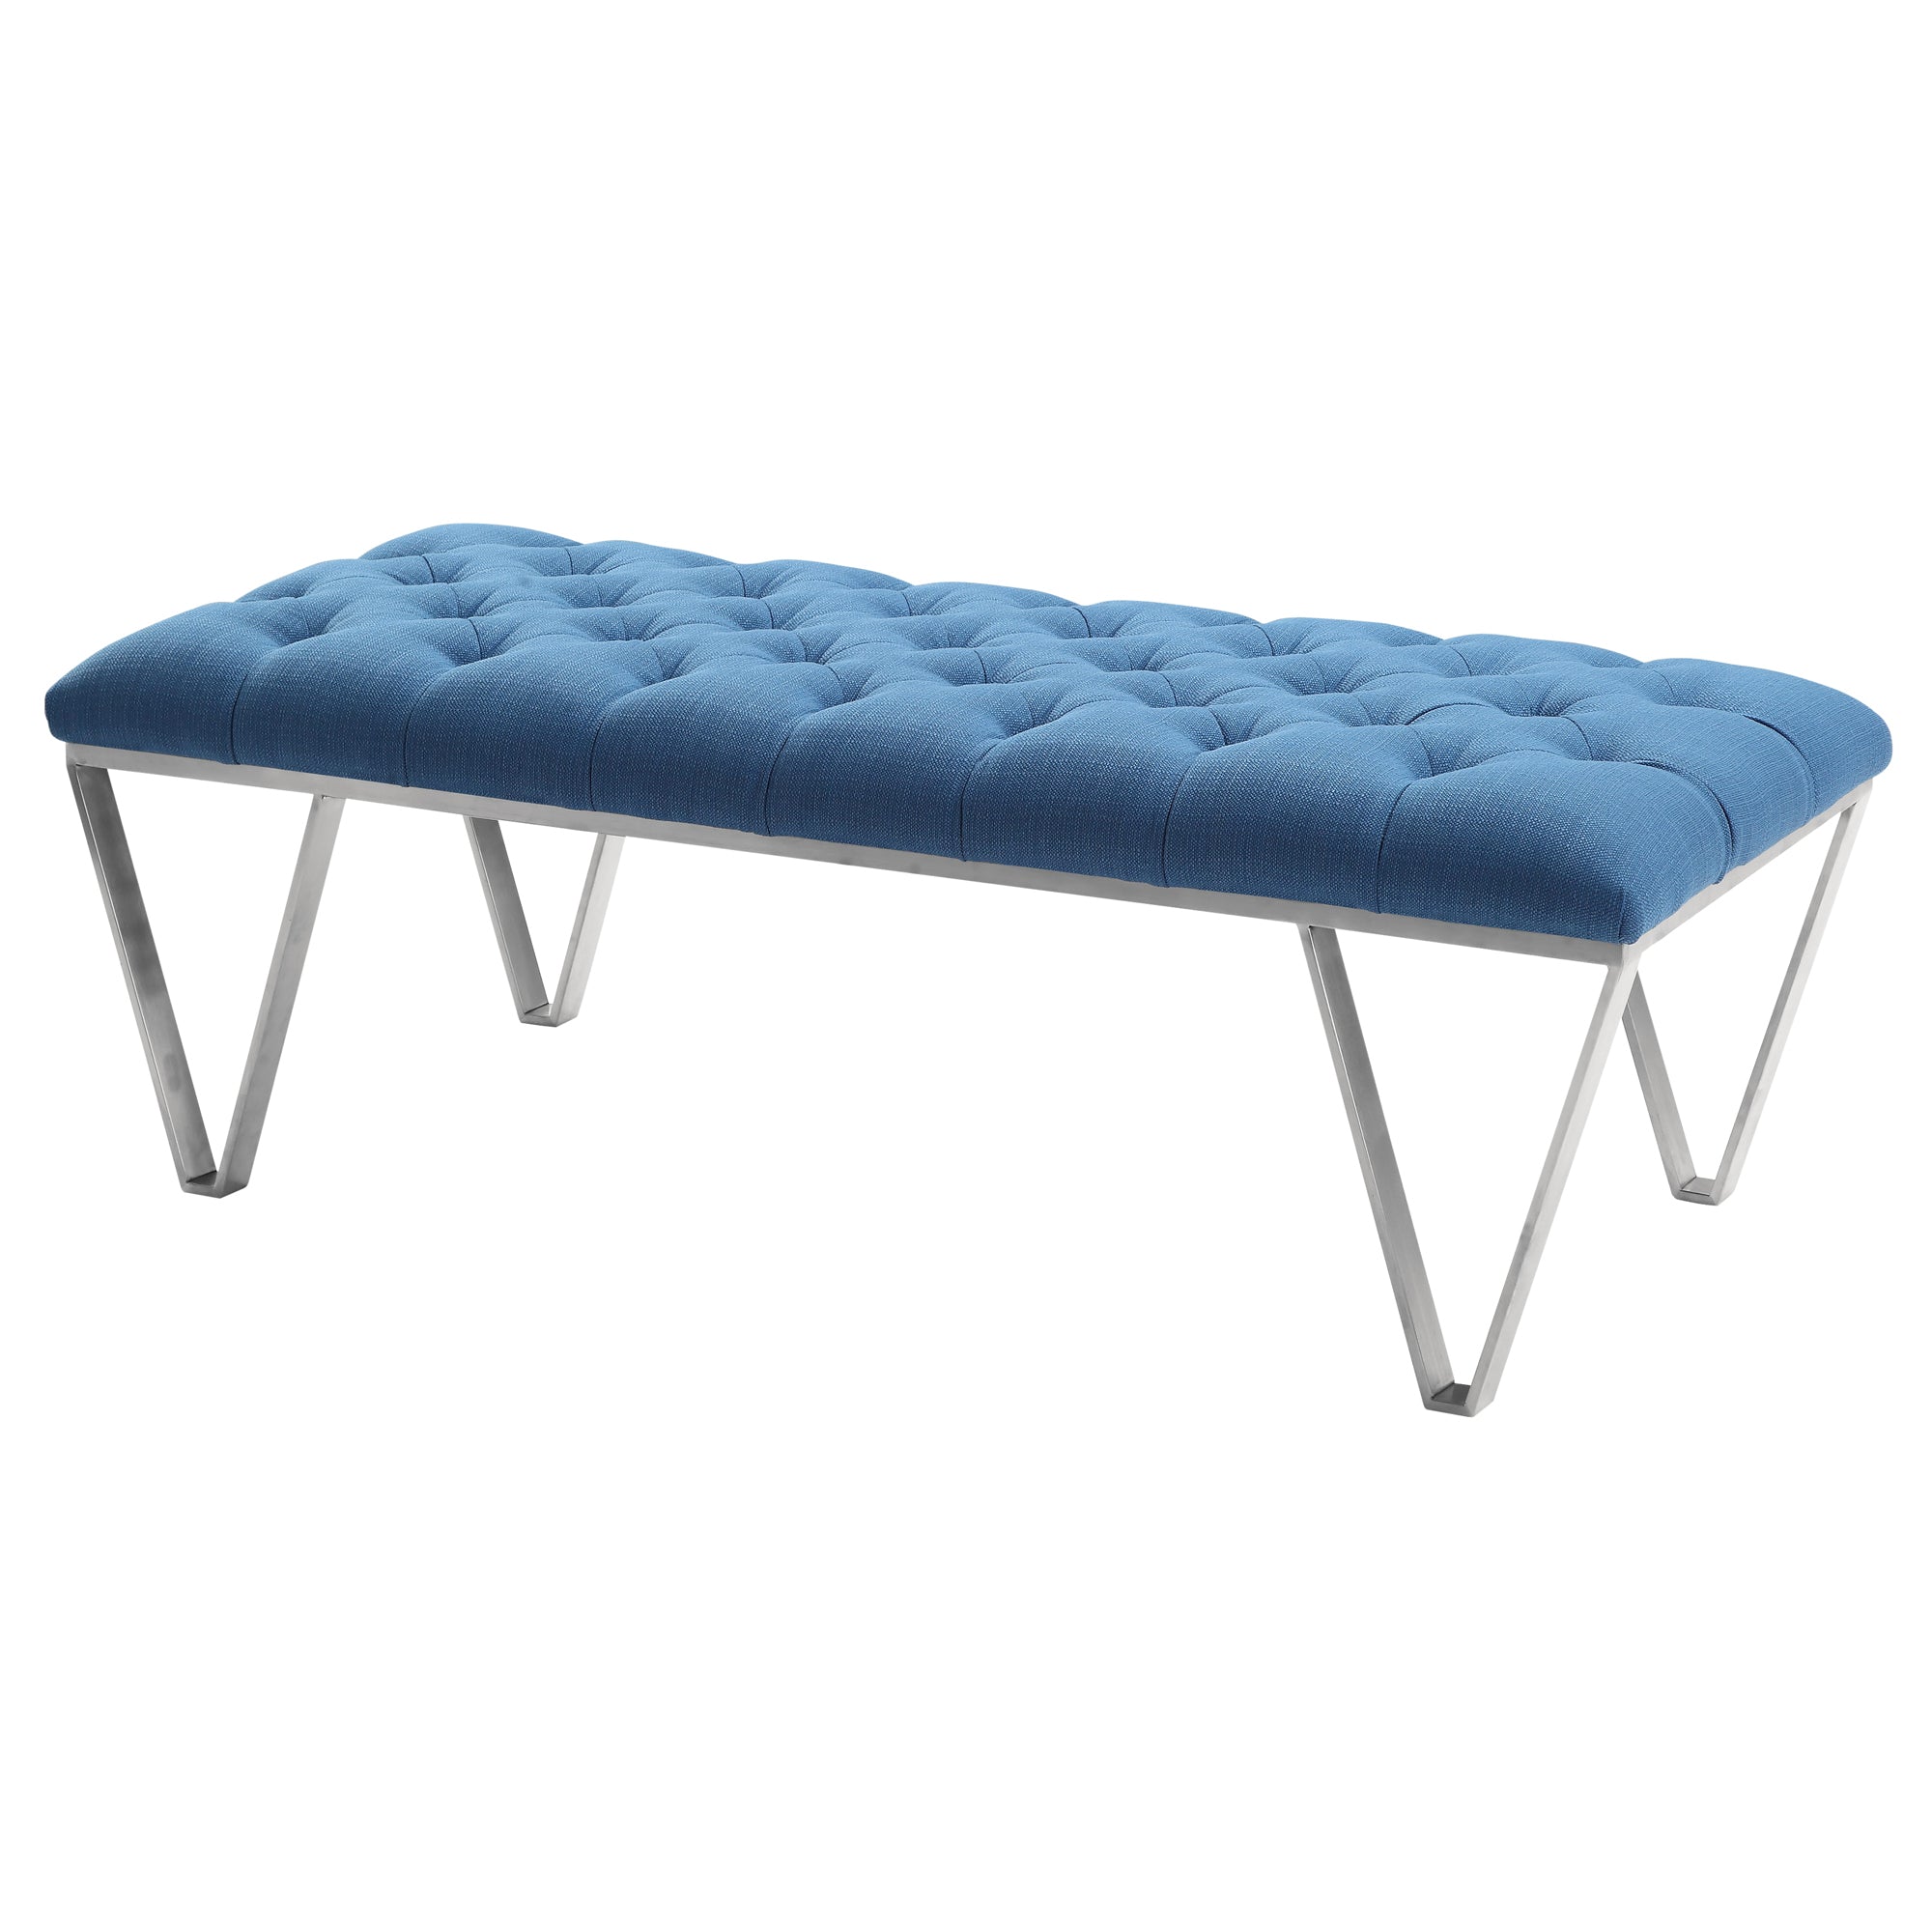 Armen Living Lcsrbeblue Serene Contemporary Tufted Bench In Brushed Stainless Steel With Blue Fabric